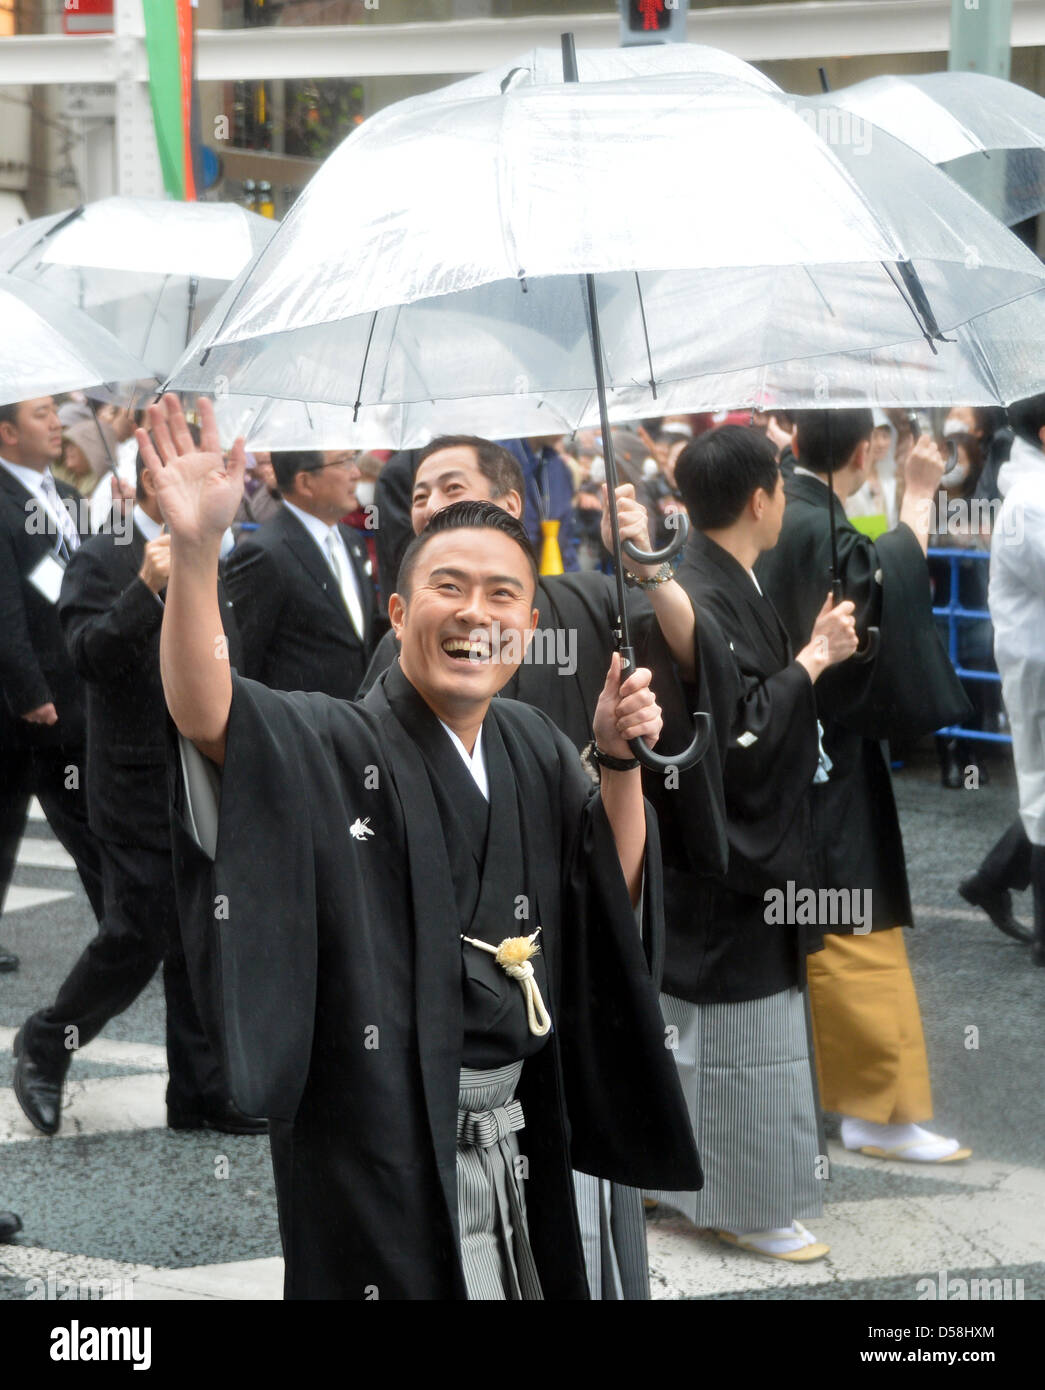 Tokyo, Japan. 27th March 2013. Ichikawa Ukon waves to fans as some 60 leading Kabuki actors parade in the rain through the main street of Tokyo's Ginza shopping district on Wednesday, March 27, 2013, in celebration of the grand opening of new Kabuki theater. After three years of renovation, the majestic theater for Japan's centuries-old performing arts of Kabuki will open its doors to the public with a three-month series of most sought-after plays. (Photo by Kaku Kurita/AFLO/Alamy Live News) FYJ-mis- Stock Photo